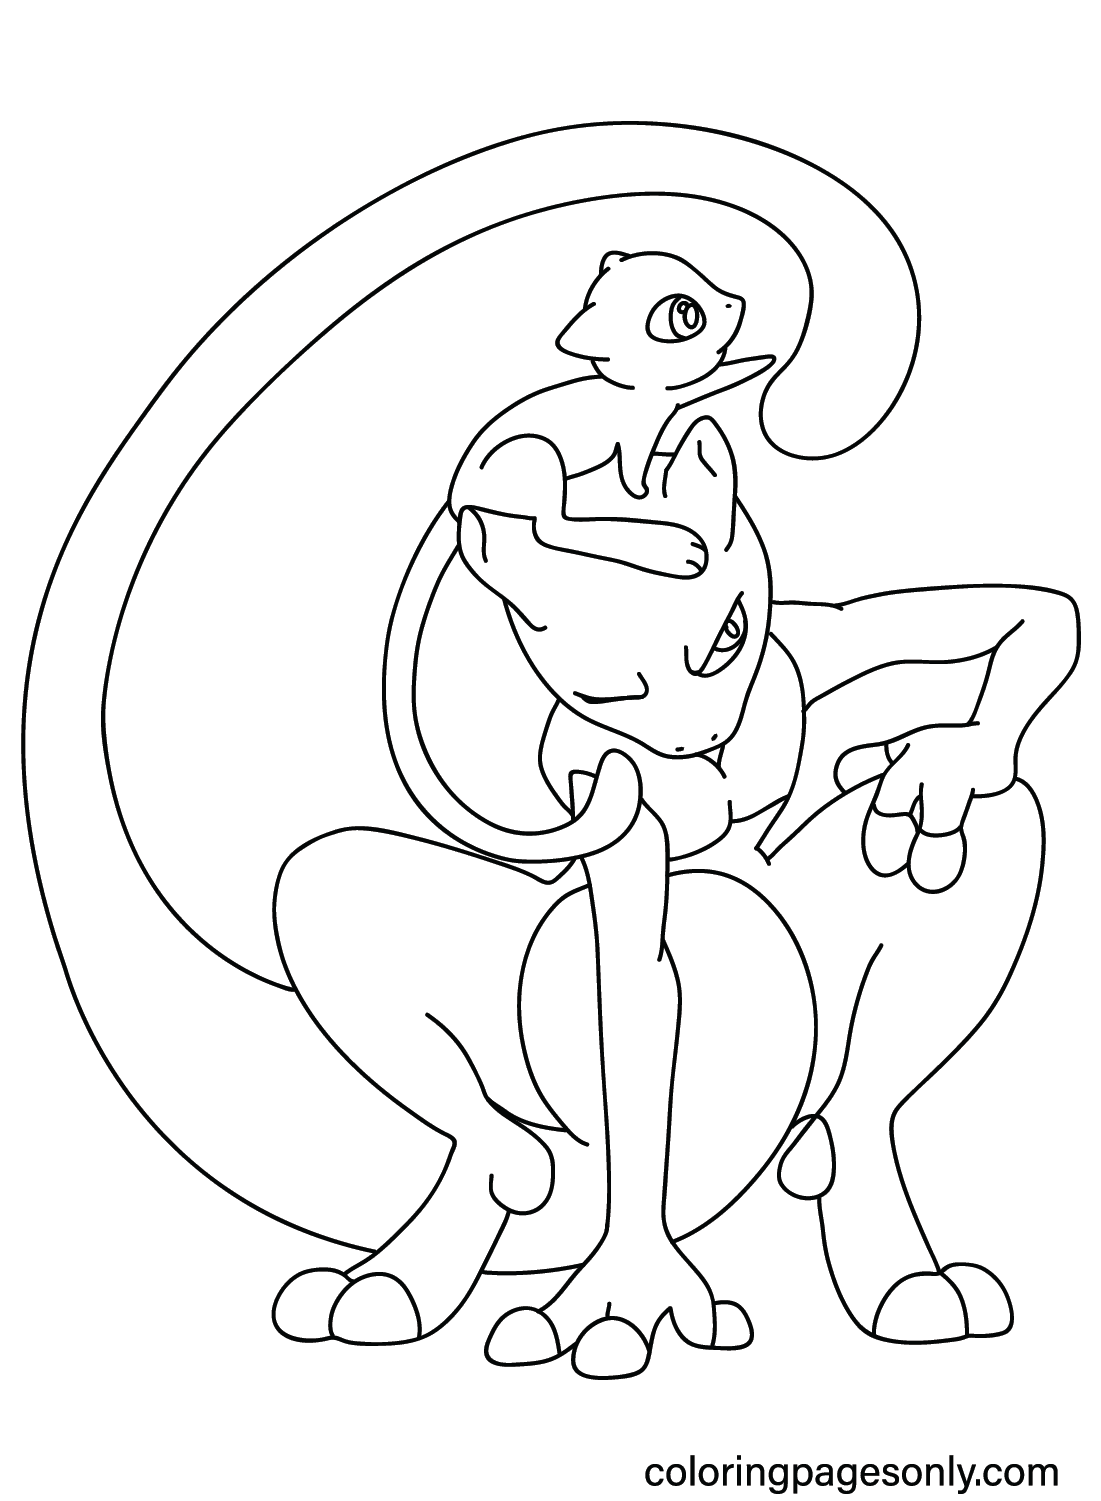 Mew and Mewtwo Coloring Sheet for Kids